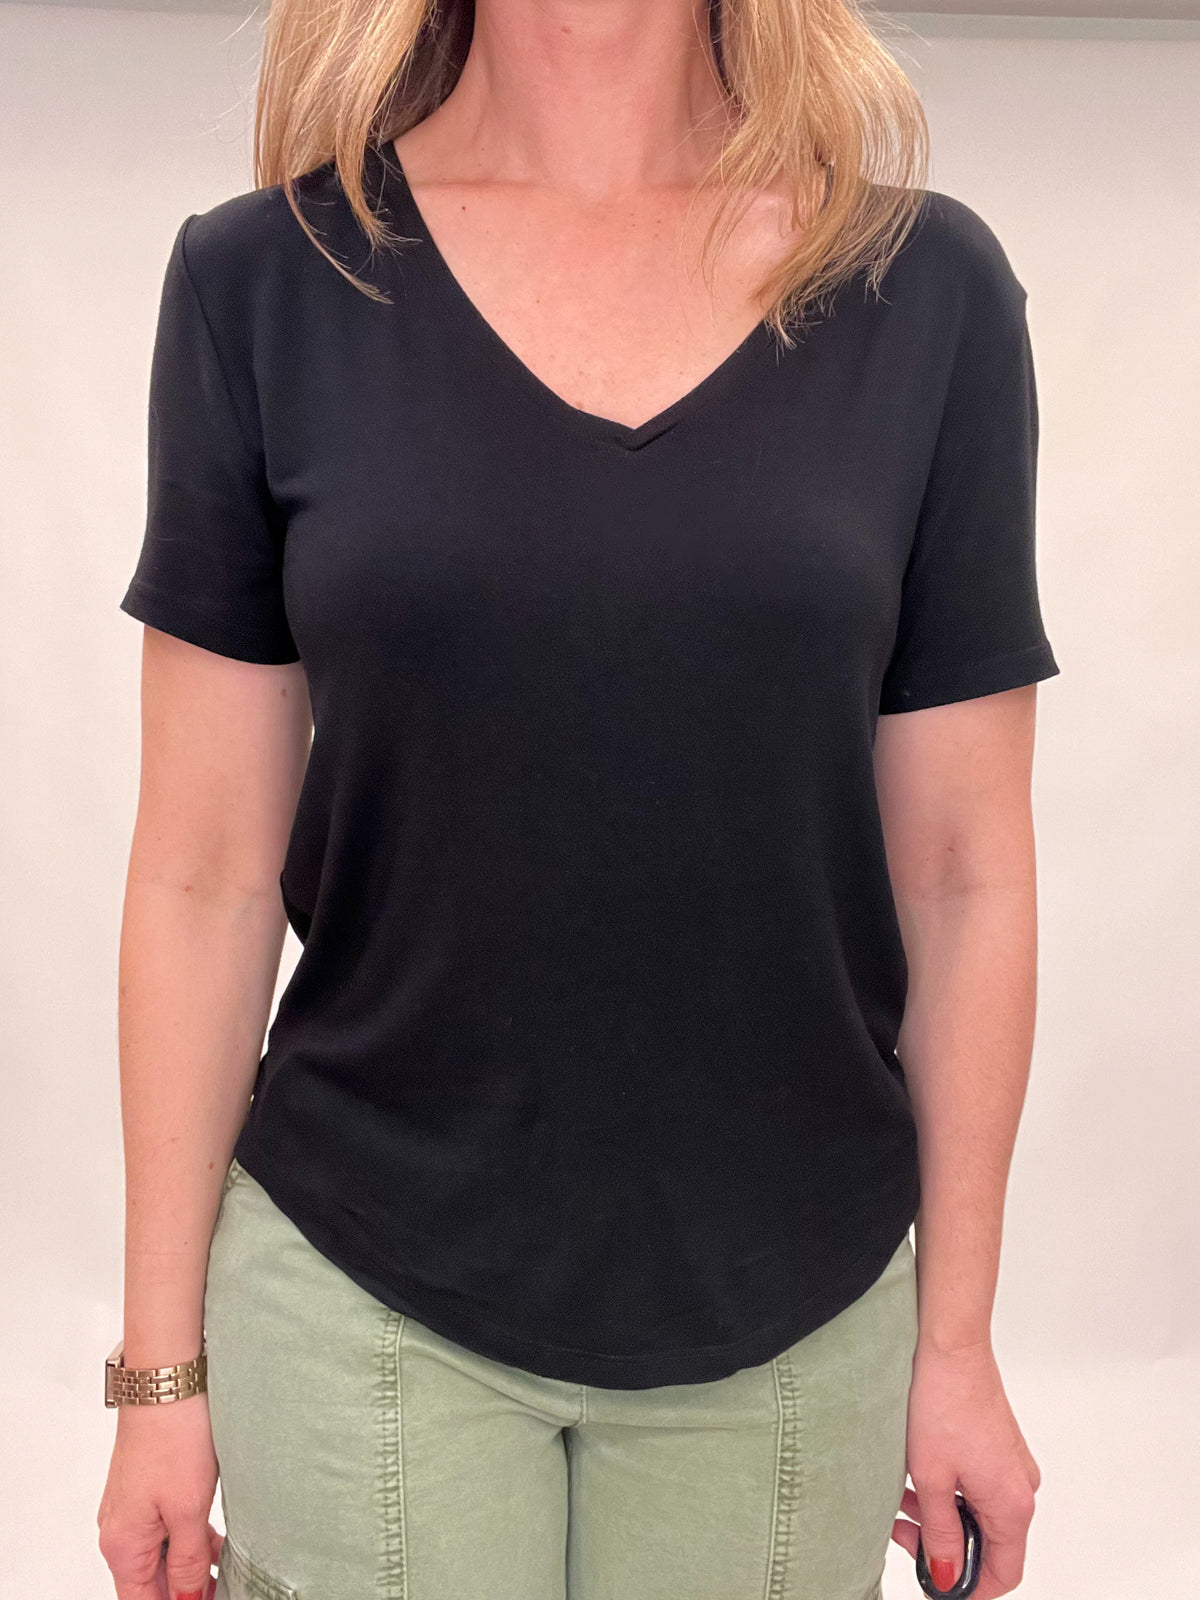 Our favorite super soft tee, designed with that drapey, relaxed fit you love - thanks to viscose Lycra jersey material. This wear-everyday tee is meant to be one of the most versatile pieces in your wardrobe and will last for years to come.